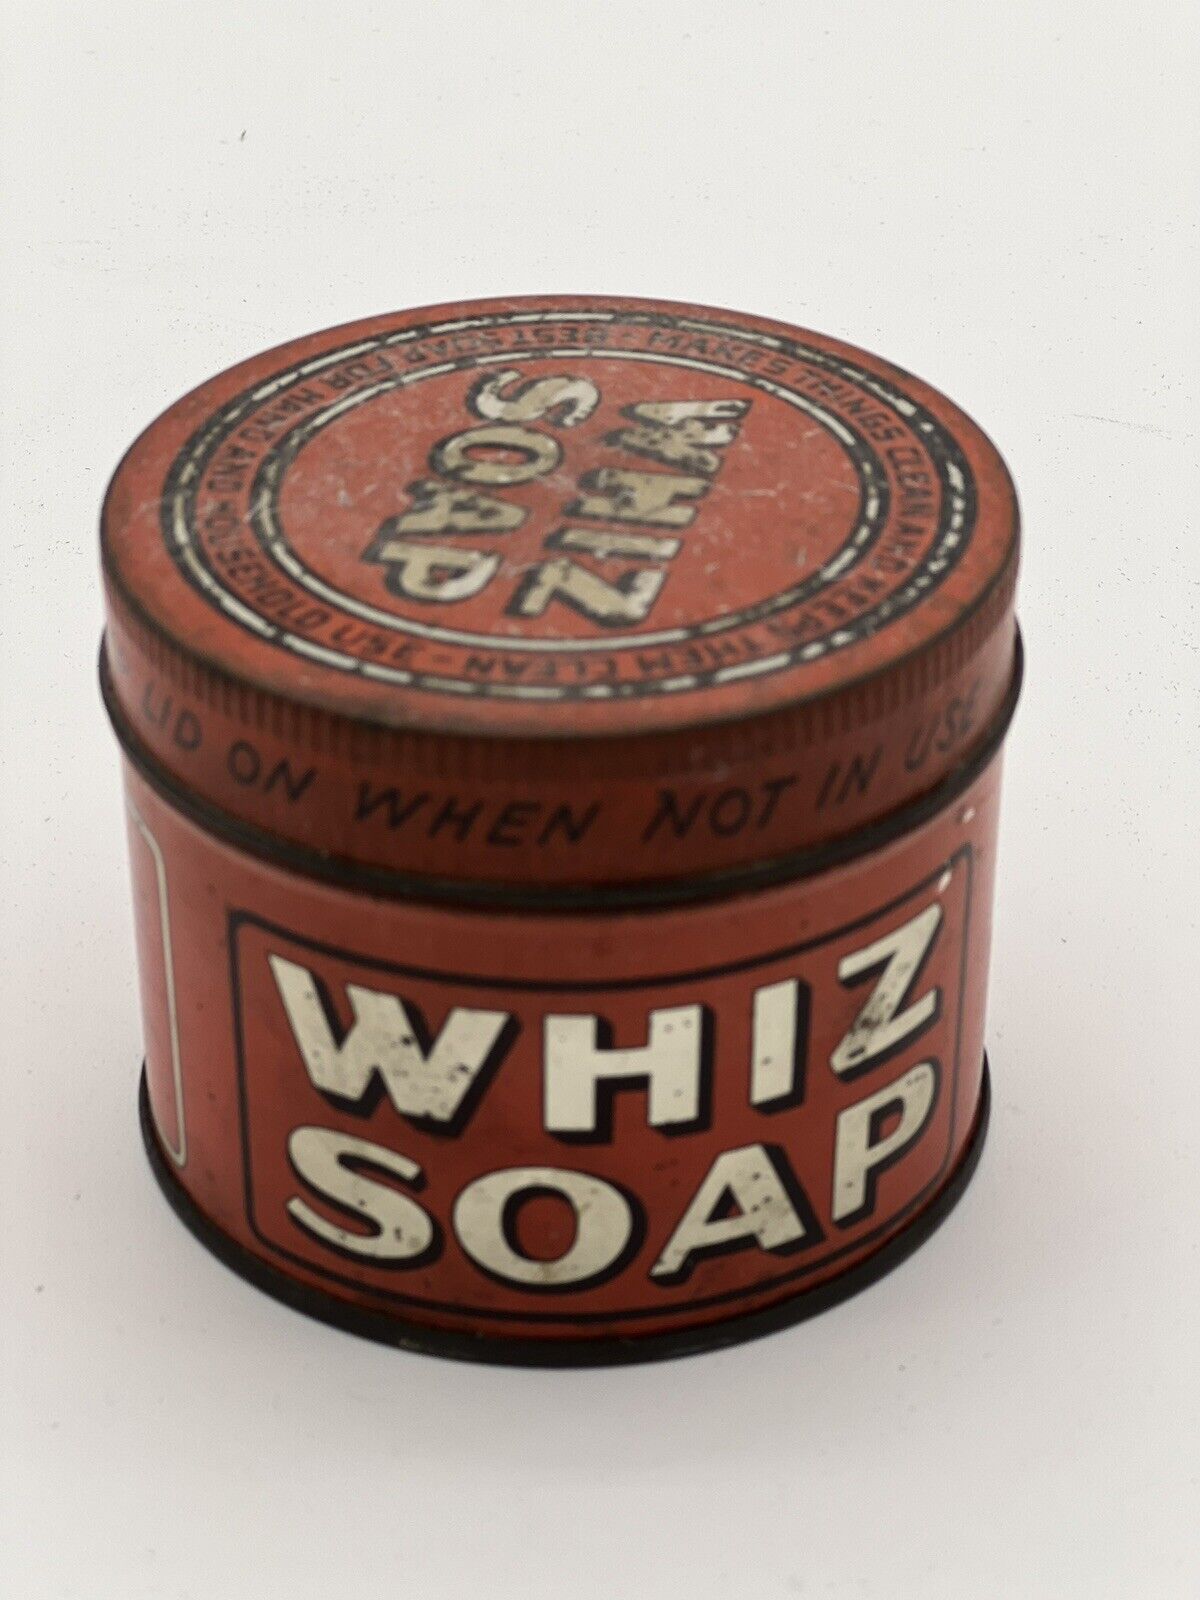 Vintage 1930’s Whiz Soap Tin Can The Davies-Young Soap Co.